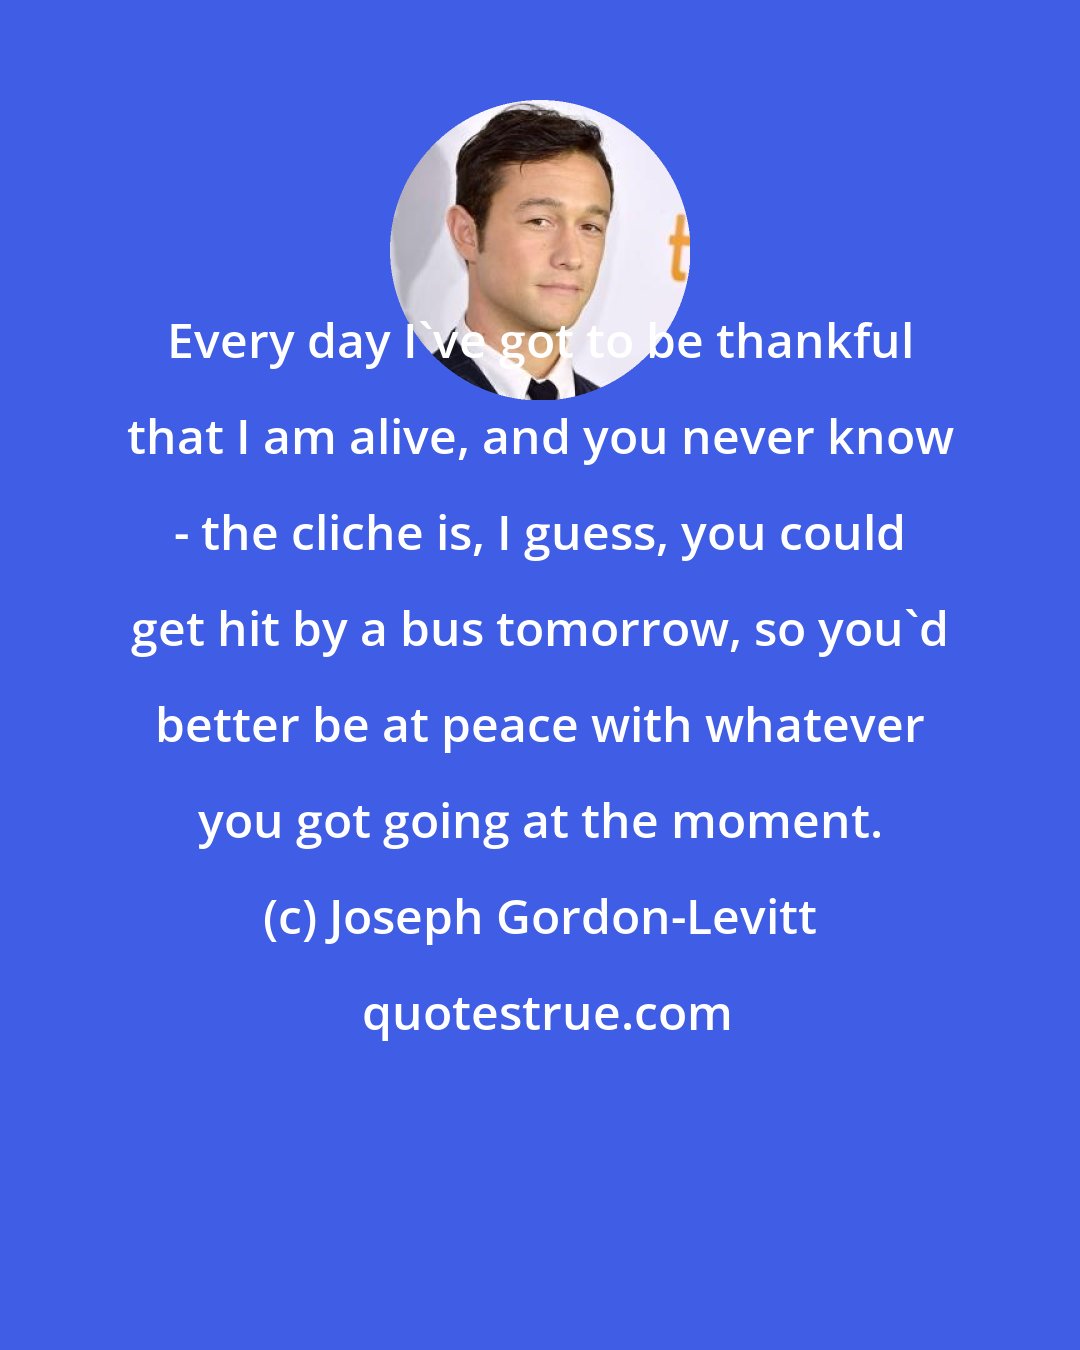 Joseph Gordon-Levitt: Every day I've got to be thankful that I am alive, and you never know - the cliche is, I guess, you could get hit by a bus tomorrow, so you'd better be at peace with whatever you got going at the moment.